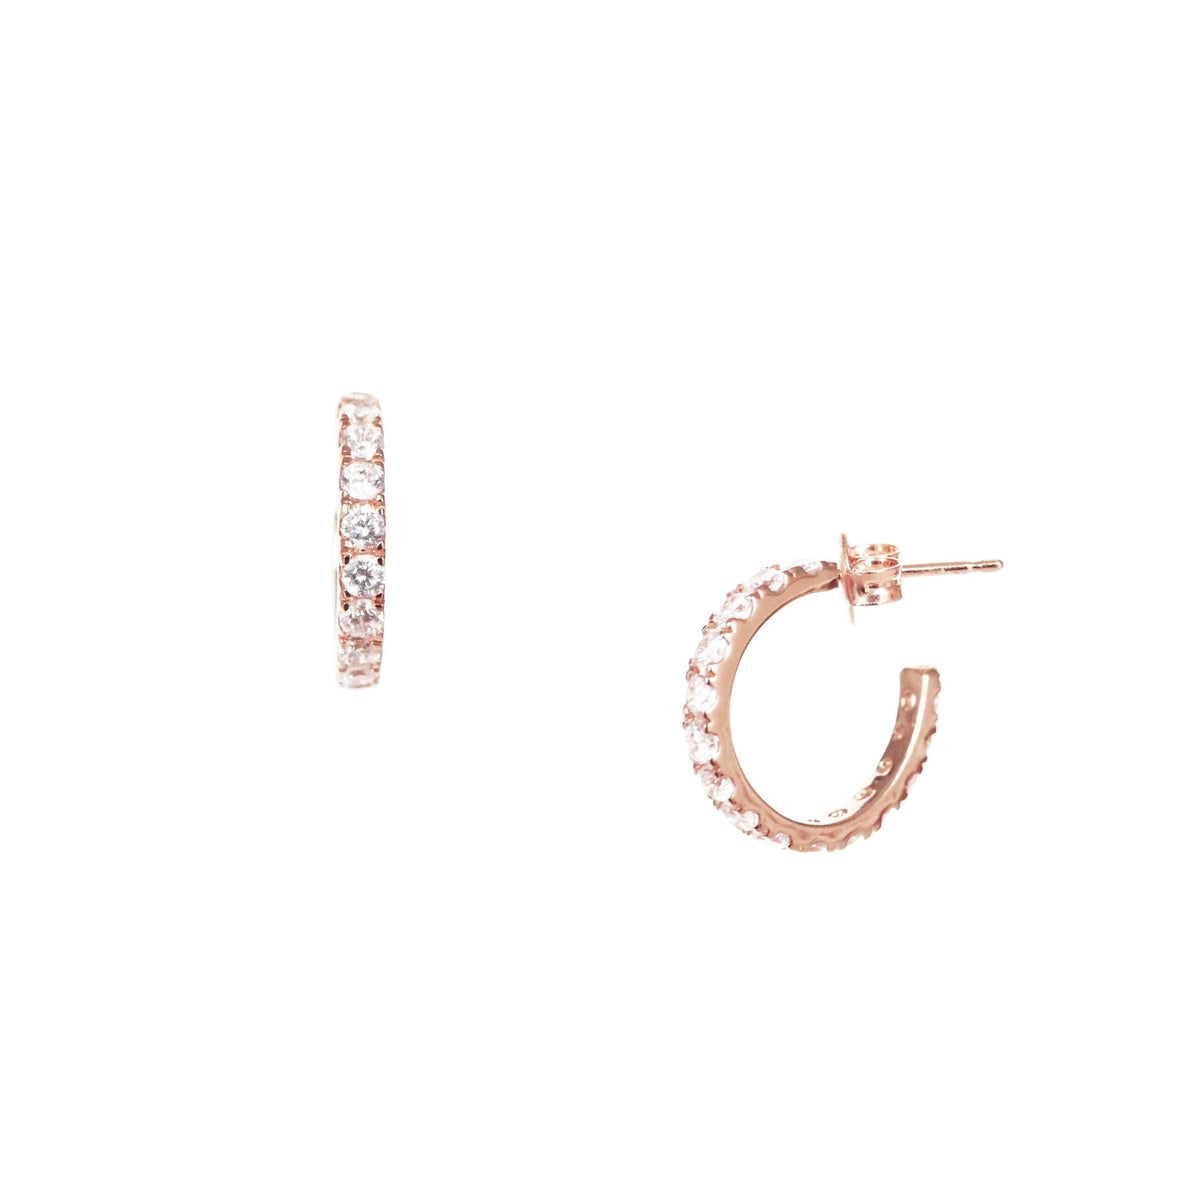 LOVE HUGGIE HOOPS - CUBIC ZIRCONIA &amp; ROSE GOLD - SO PRETTY CARA COTTER